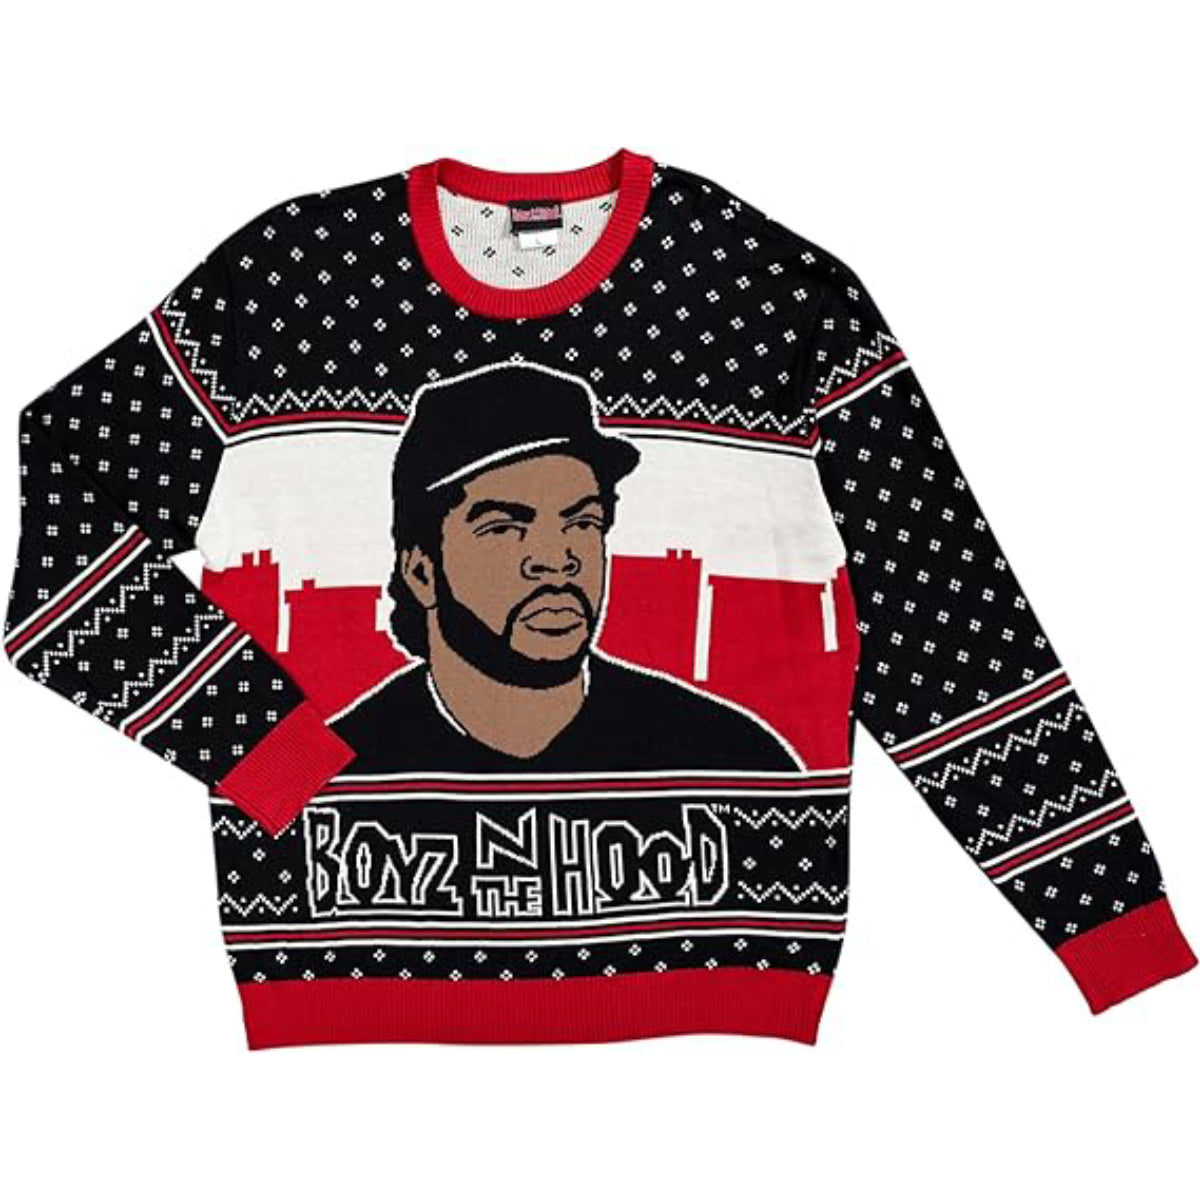 Boyz N The Hood Ugly Christmas Sweaters Doughboy's Gangster Style for the Holidays